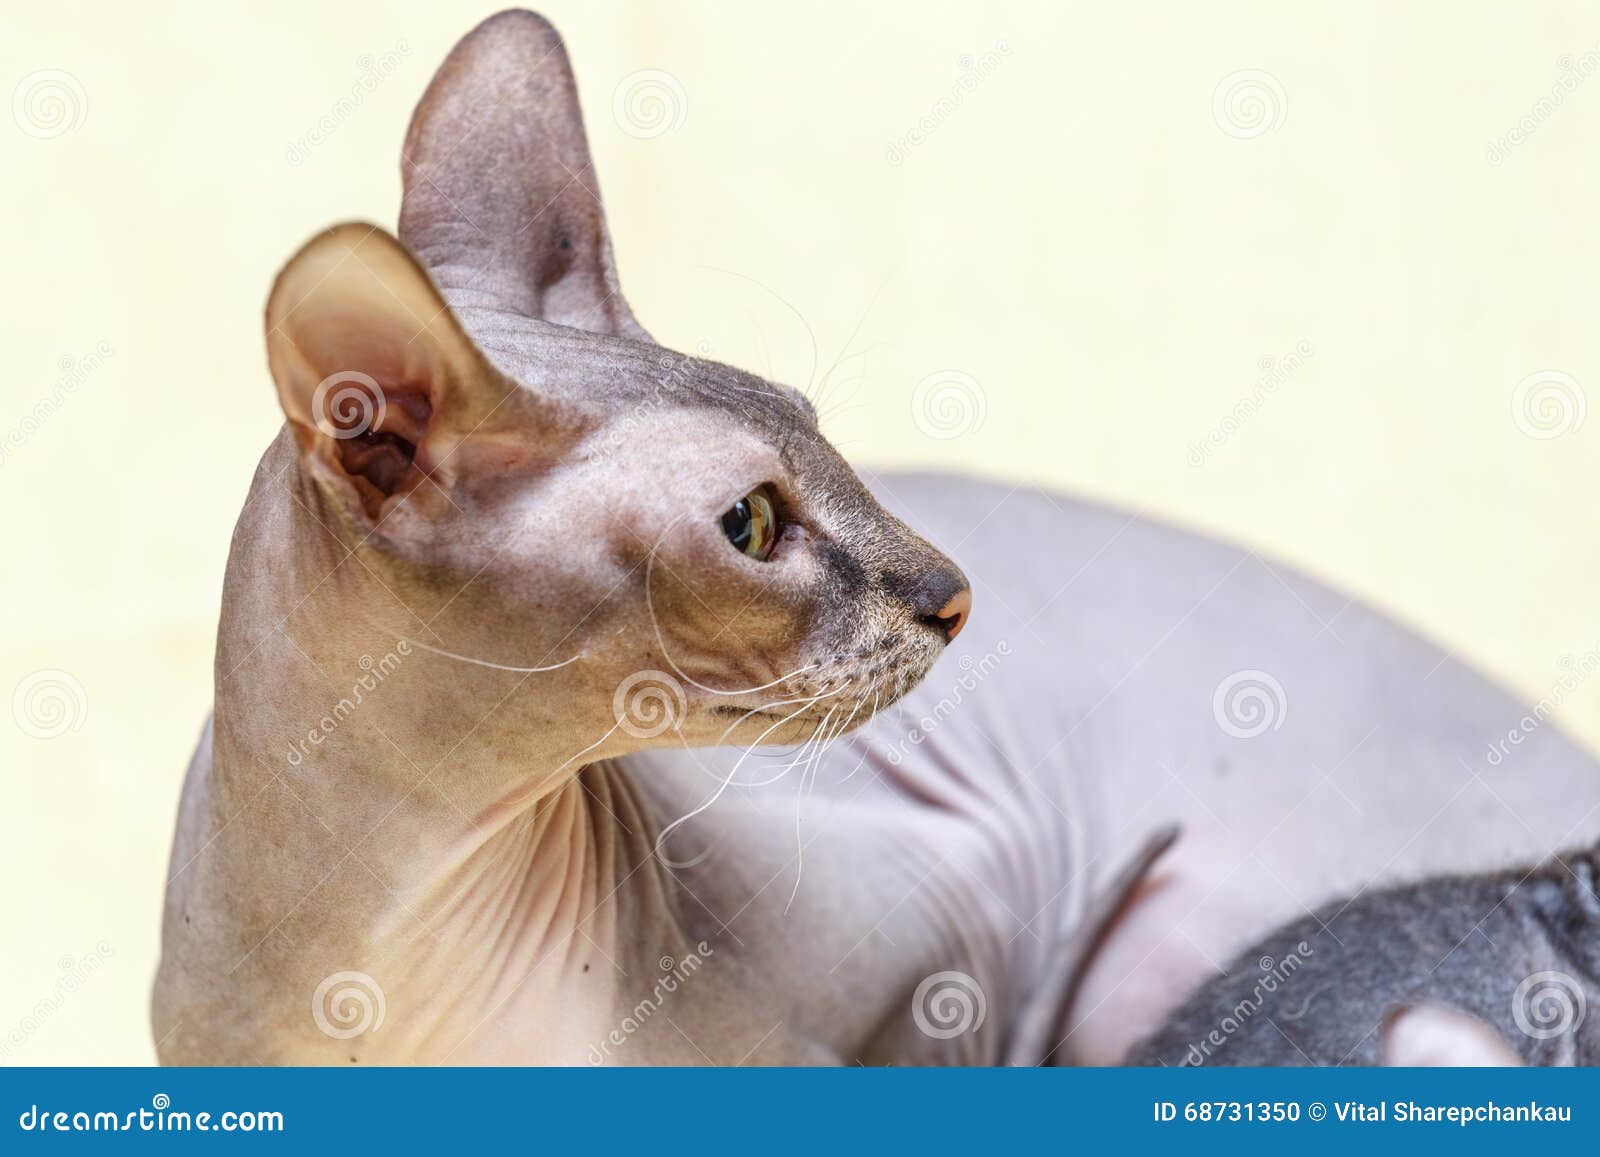 Donskoy or Don Sphynx - Information, Health, Pictures 